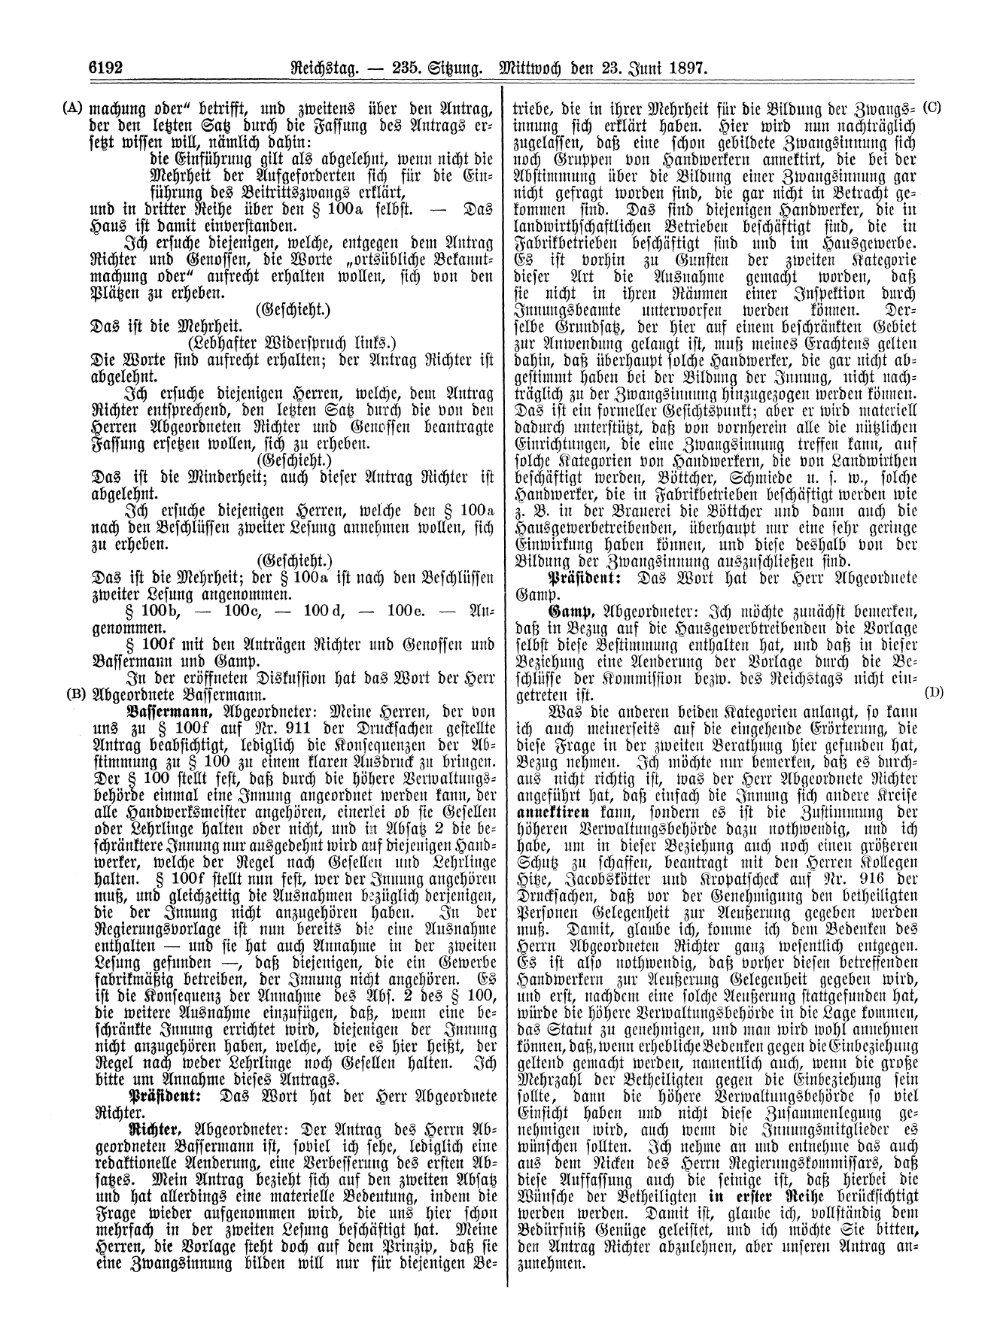 Scan of page 6192